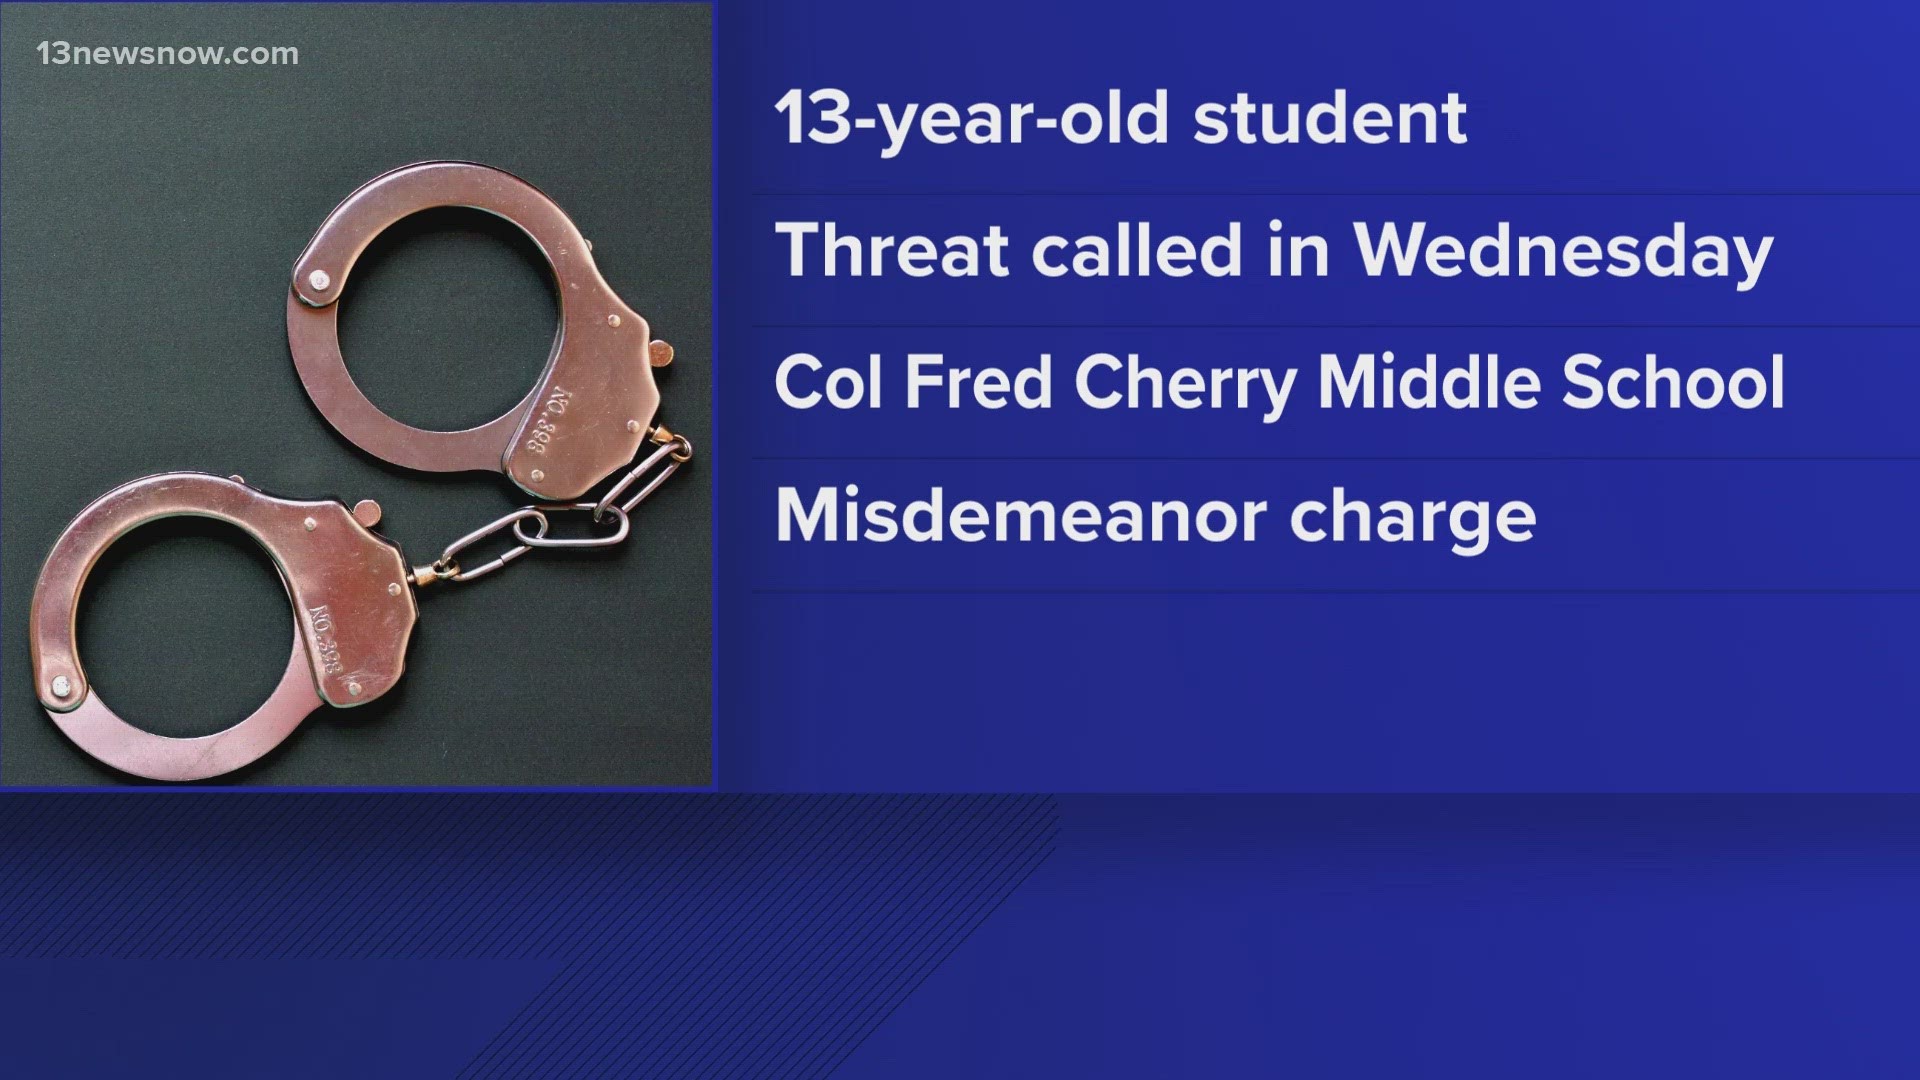 The 13-year-old could get a year behind bars and a fine.